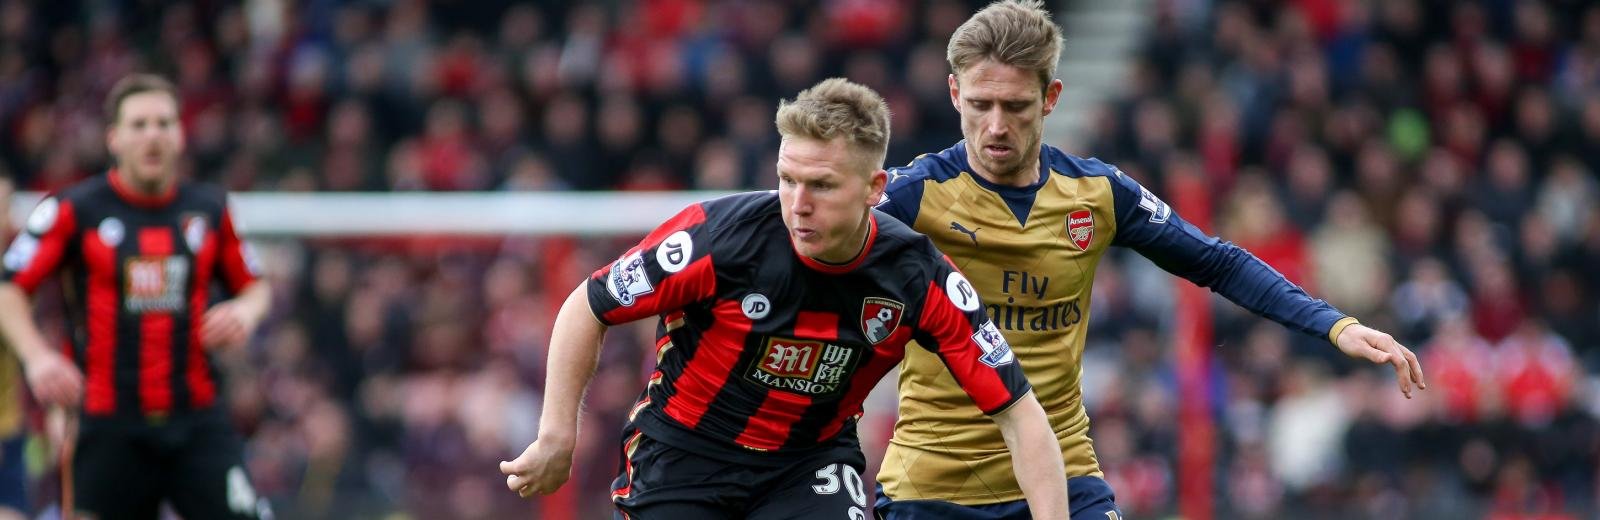 Tottenham join Chelsea and Manchester United in the hunt for AFC Bournemouth’s star forward